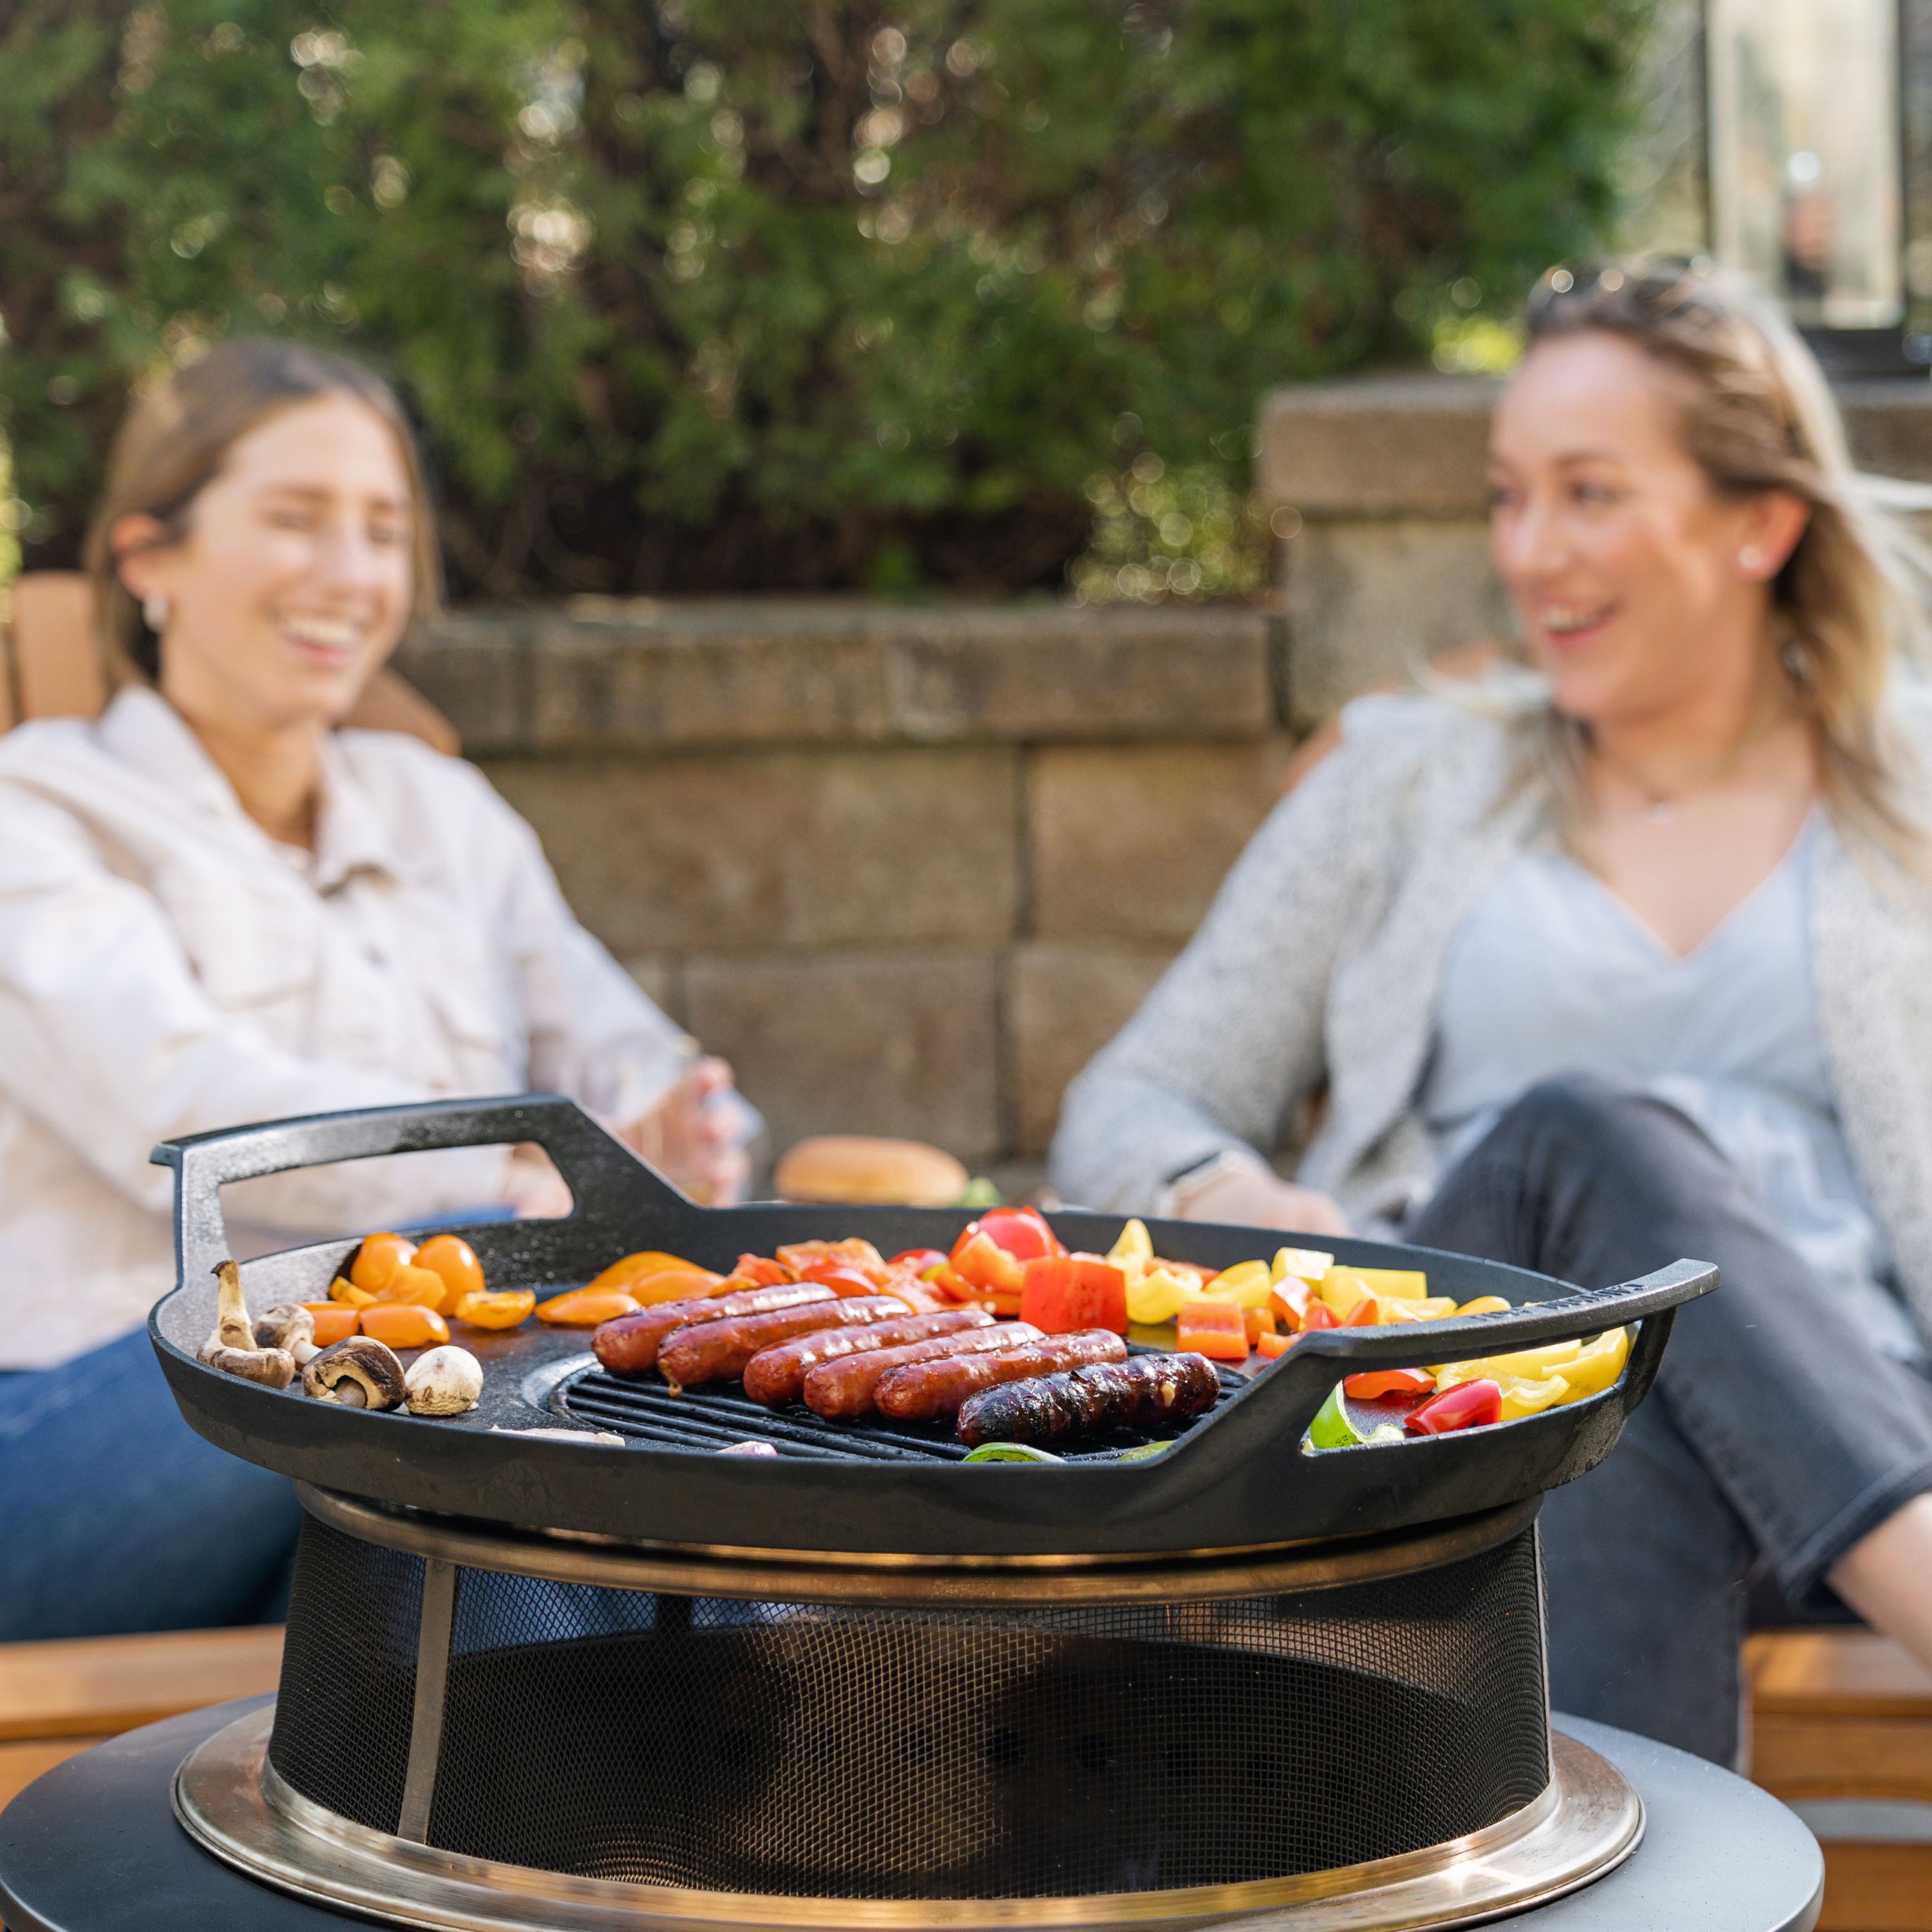 Cleanburn Fire Pit Griddle and Grill Top